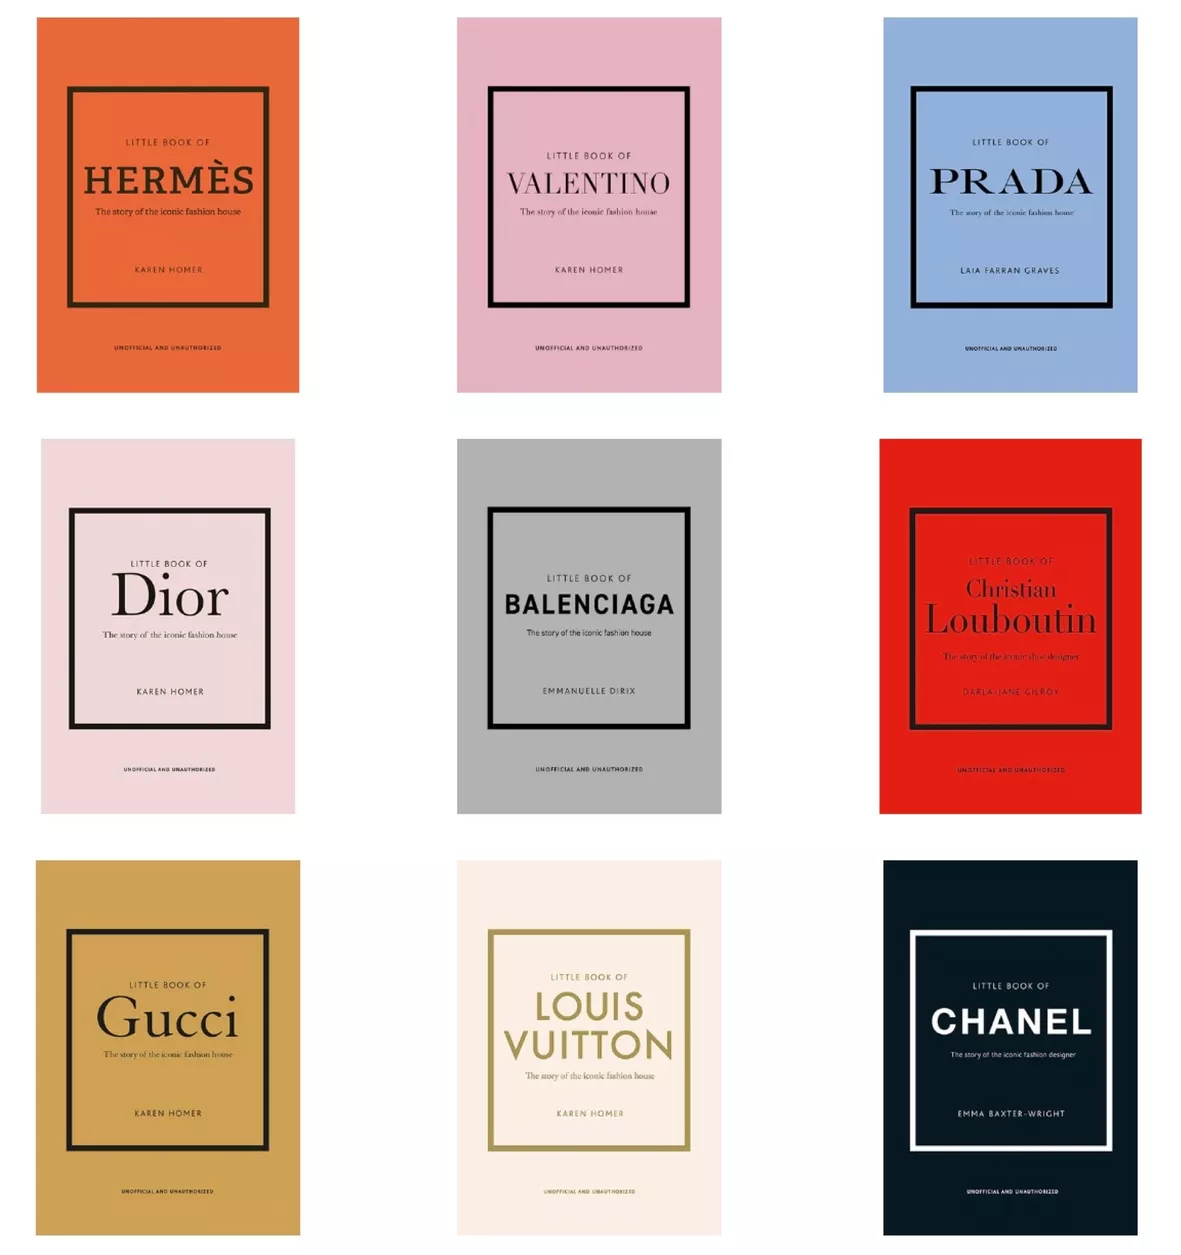 The Little Book Of Chanel, Home